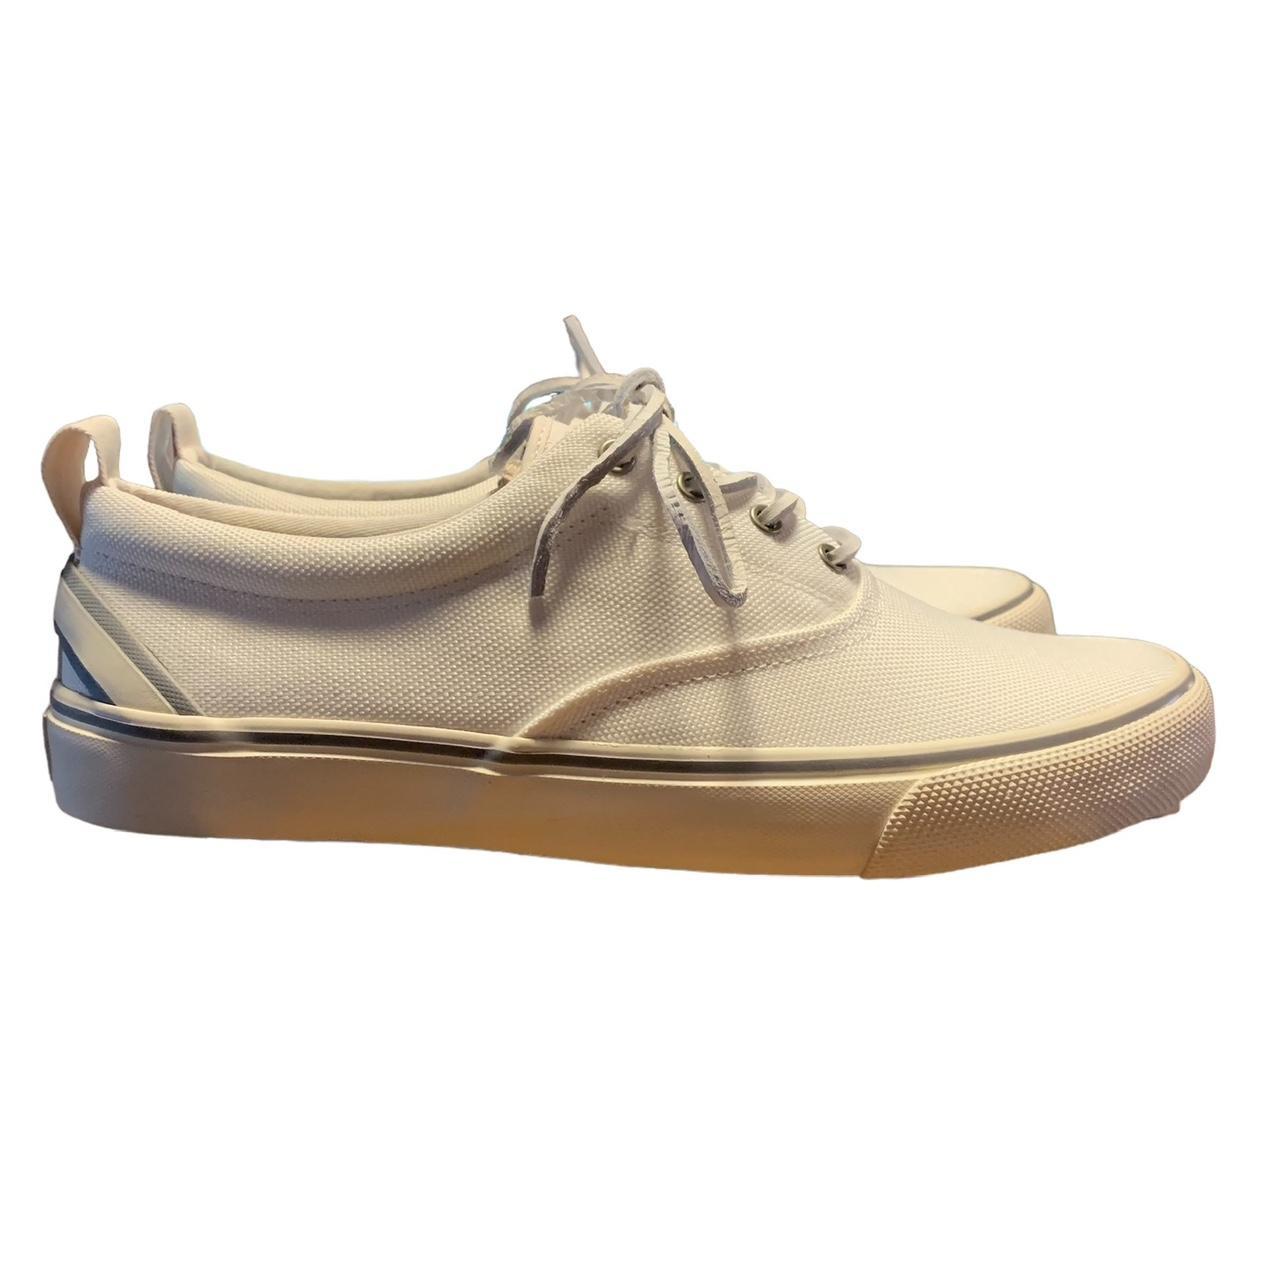 Sperry Men's White Trainers